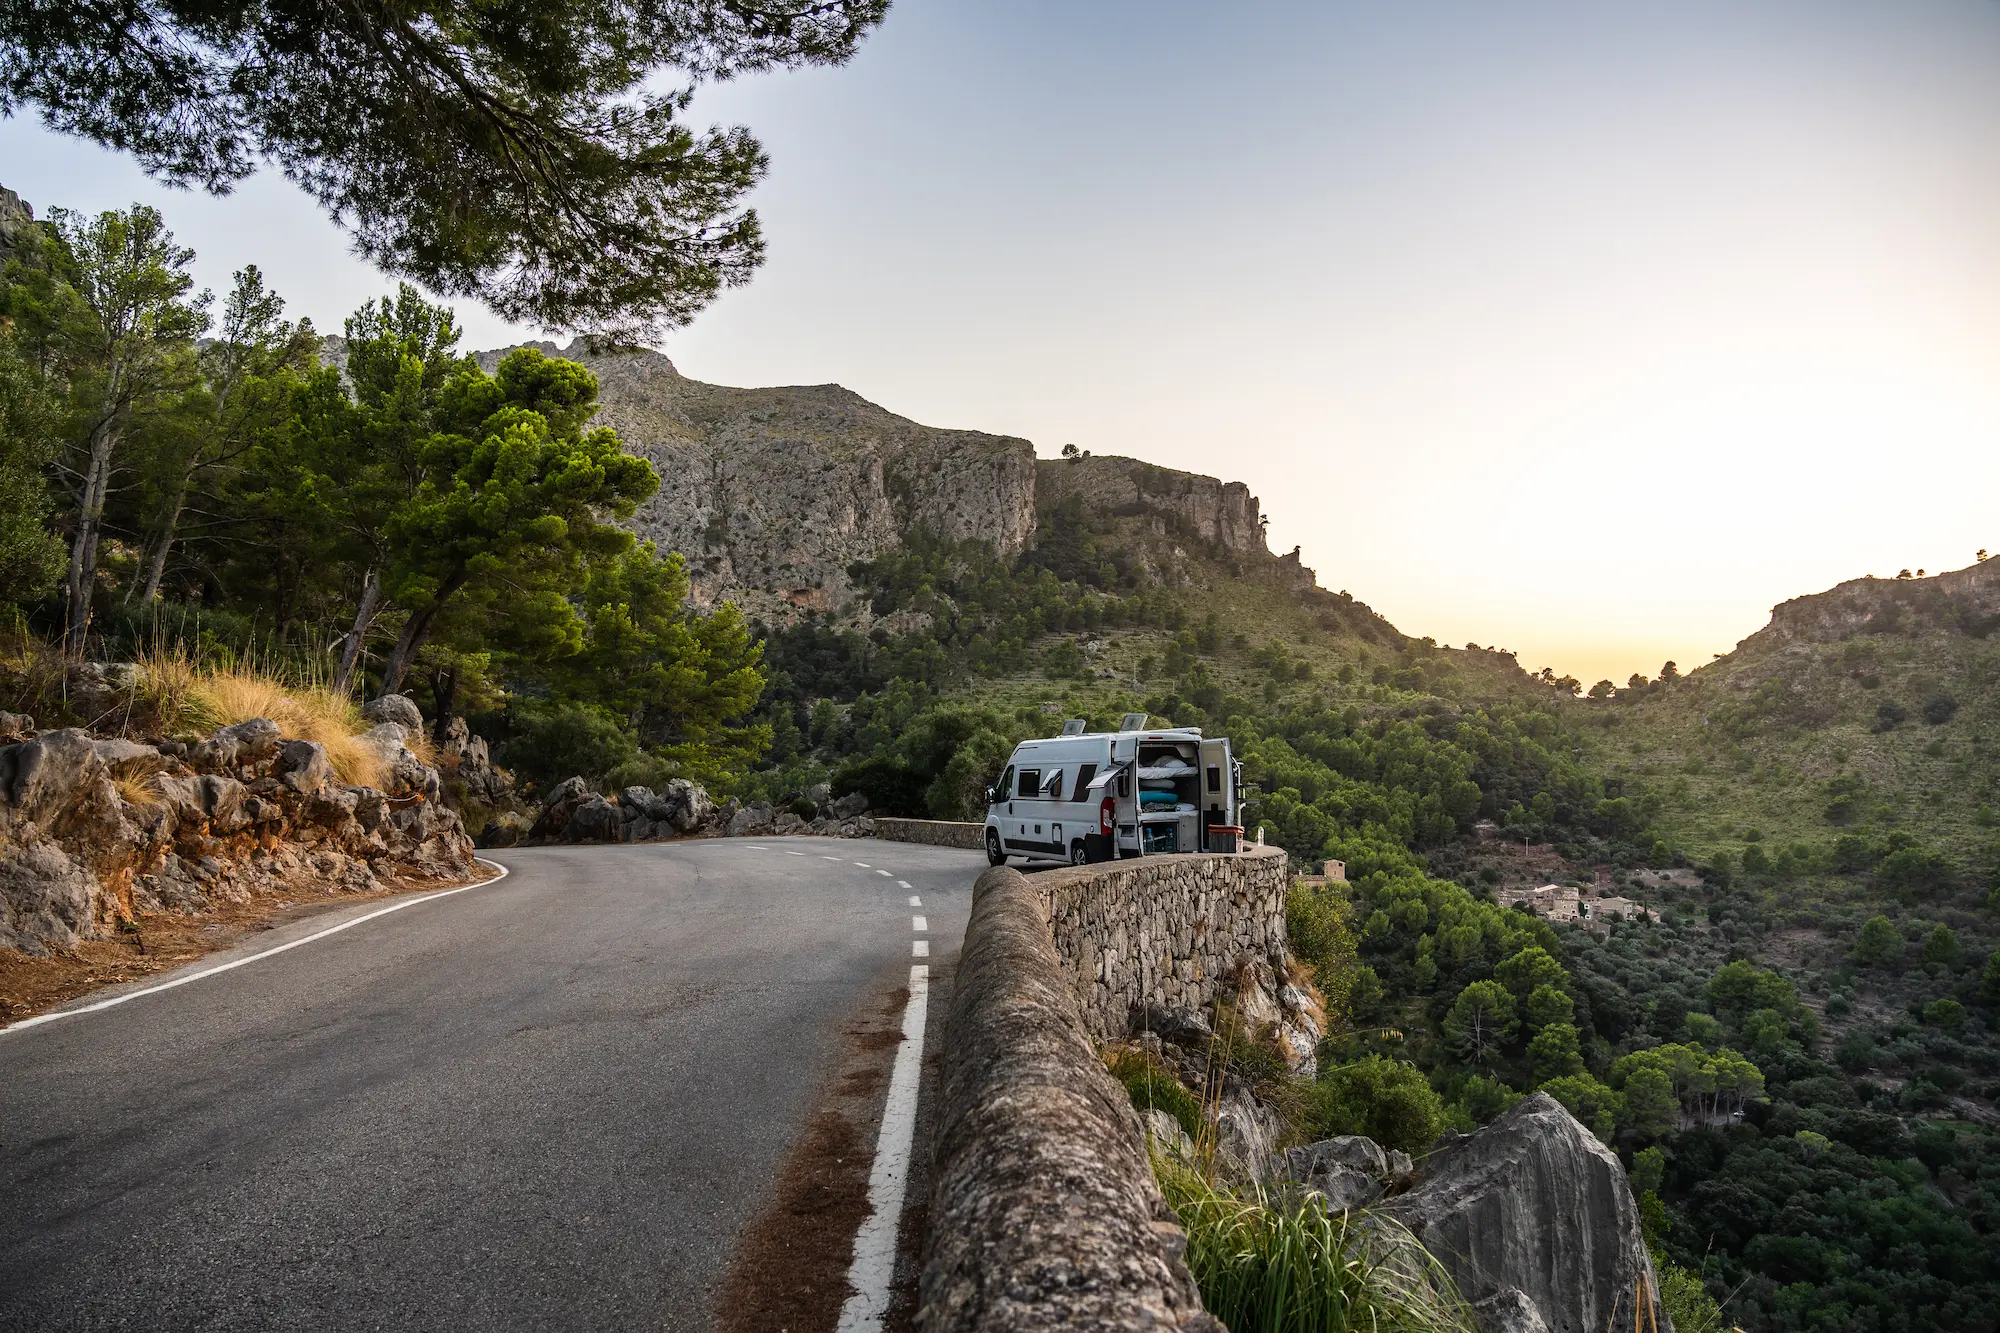 An adventure on the dry-stone route: Historical hikes in the Tramuntana mountains